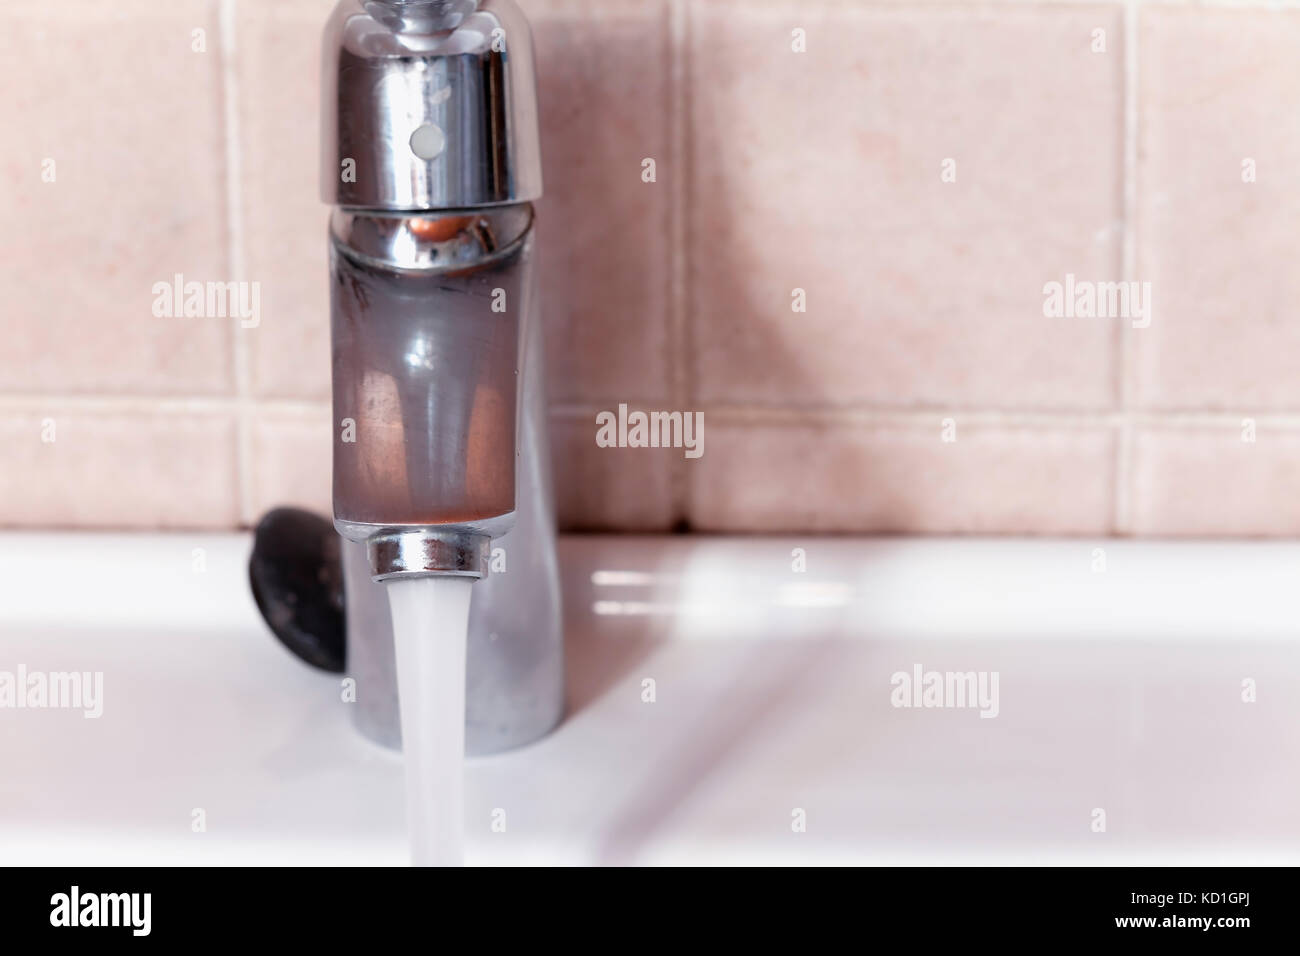 Open faucet letting the water run. Stock Photo